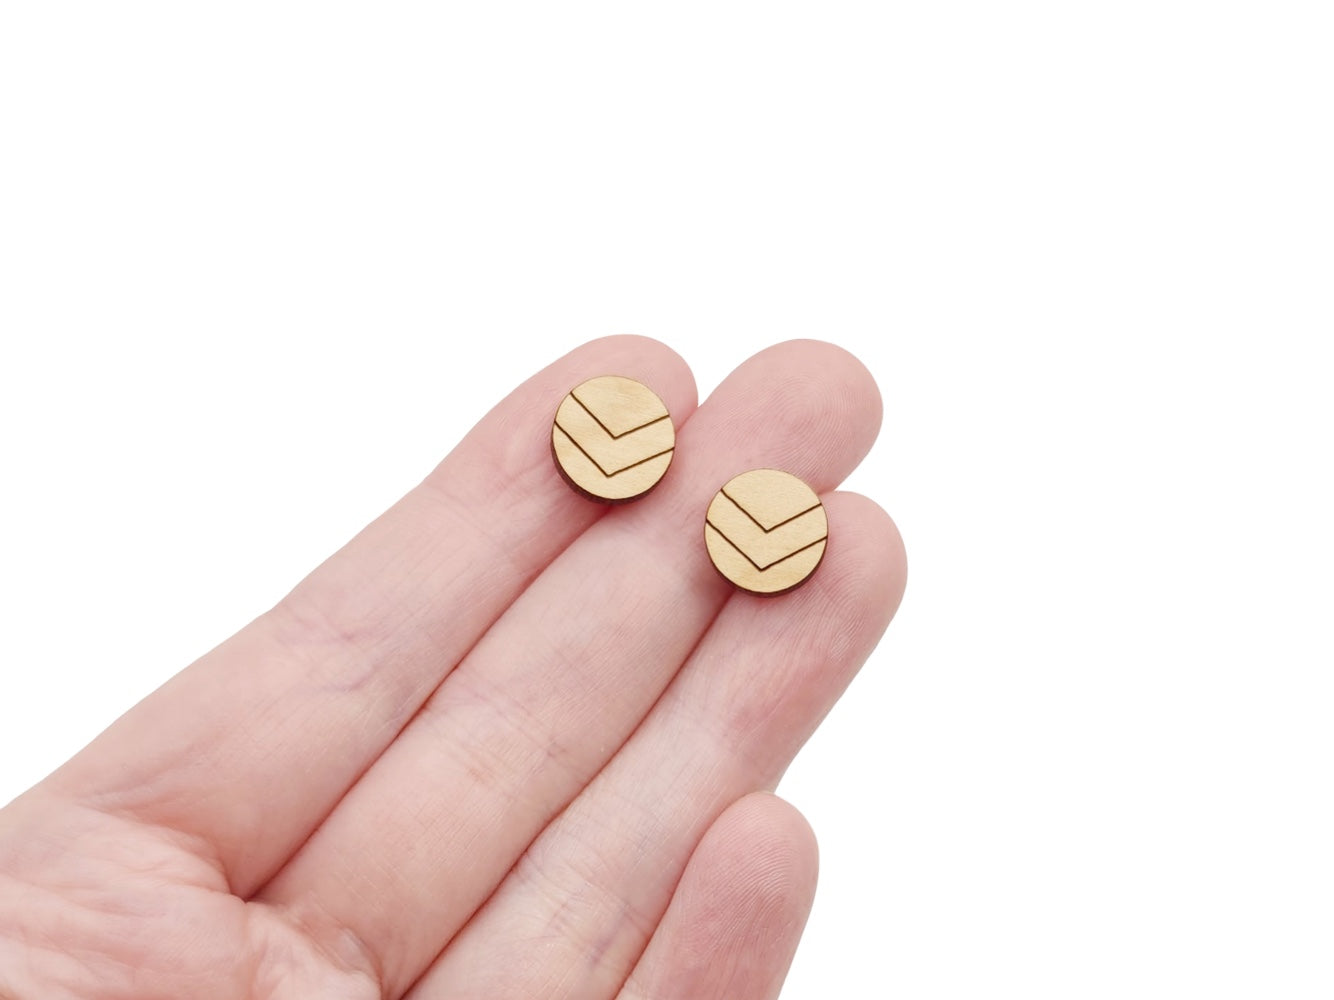 a hand holding a pair of round wooden cabochon earring blanks engraved with chevron lines